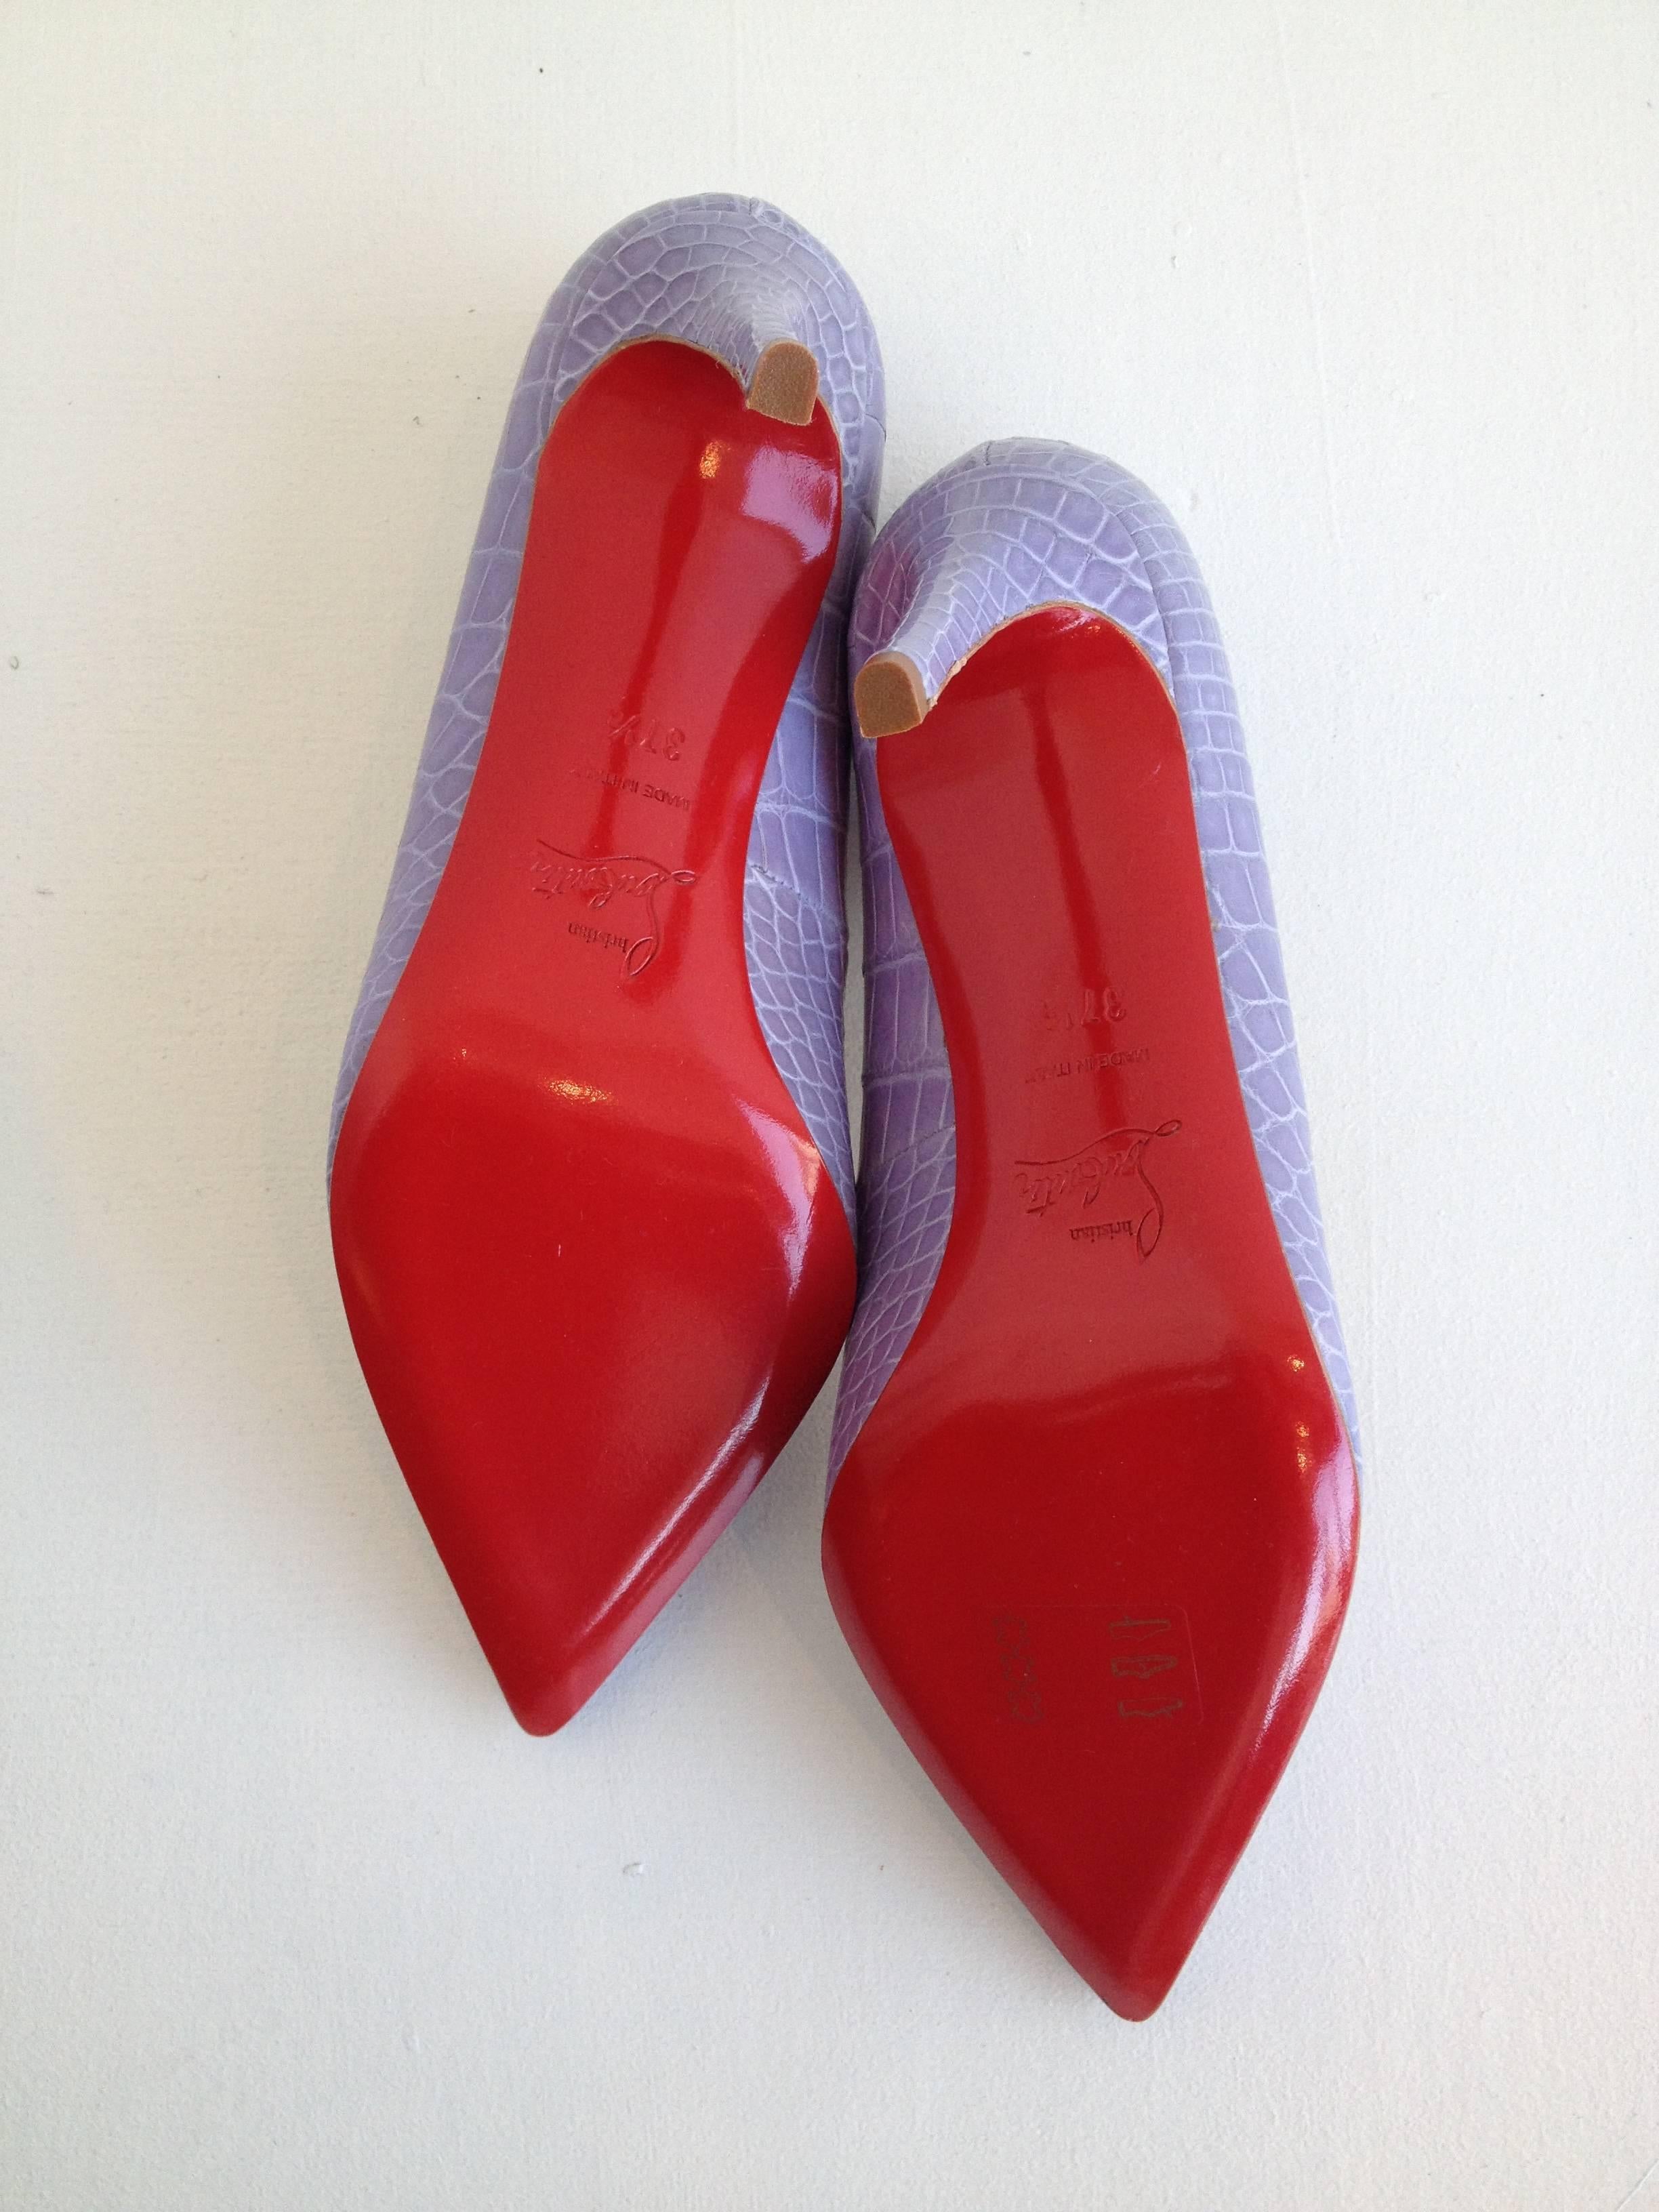 Christian Louboutin Lavender Crocodile Pumps Size 37.5 (7) In New Condition For Sale In San Francisco, CA